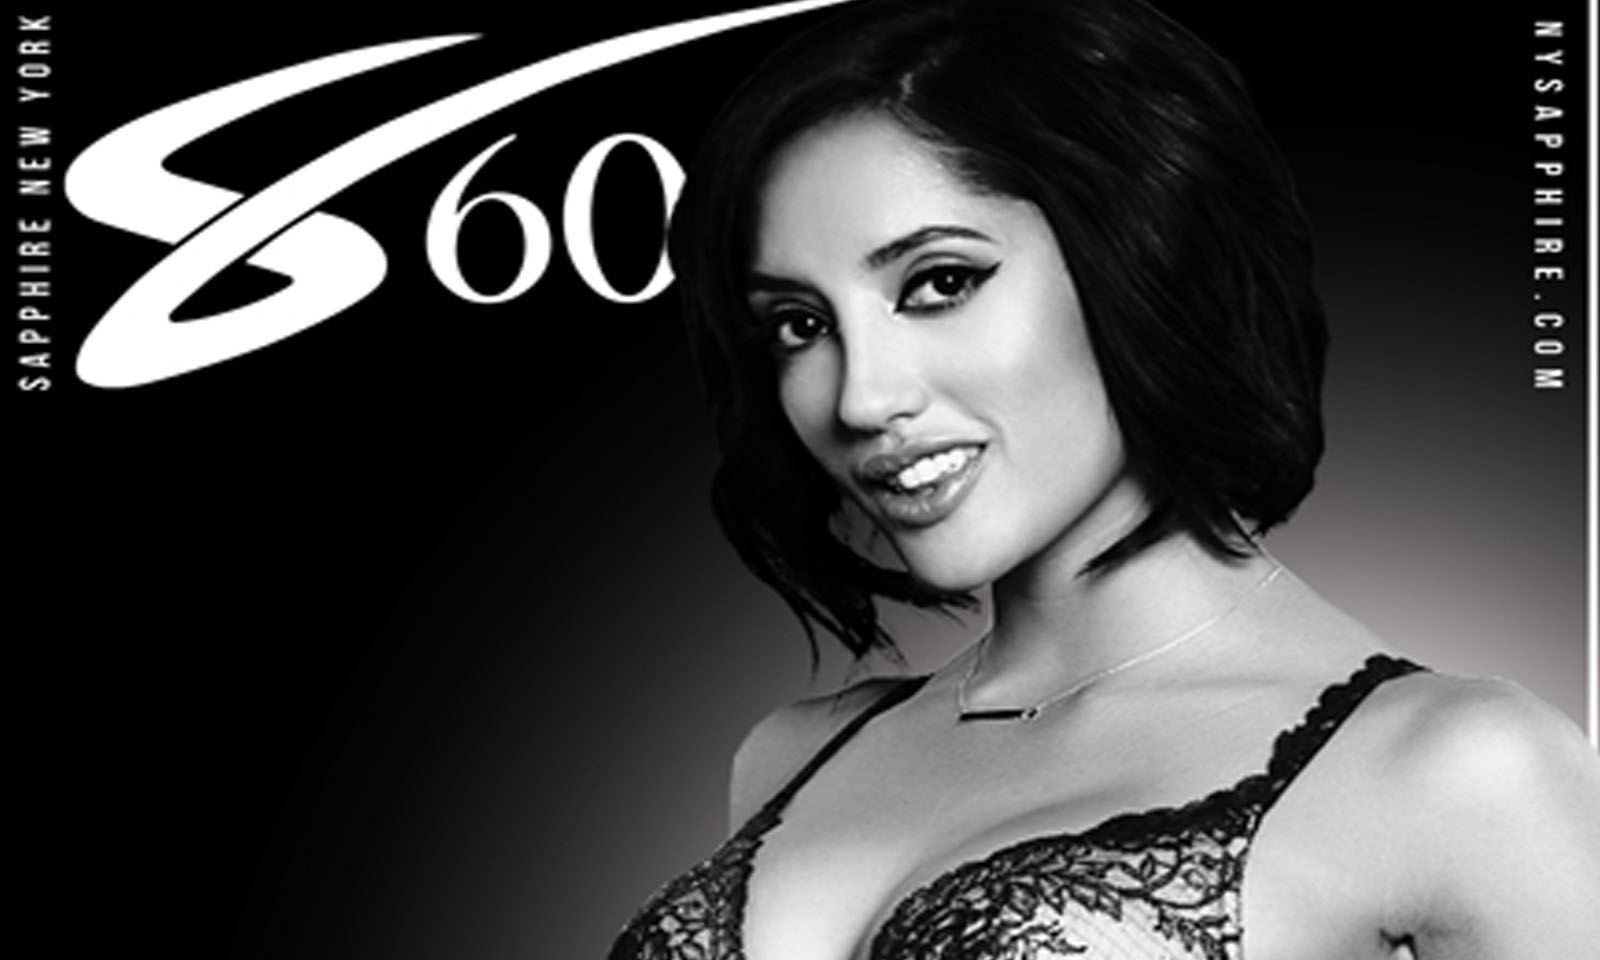 Chloe Amour Headlines Sapphire 60 in New York for One Night